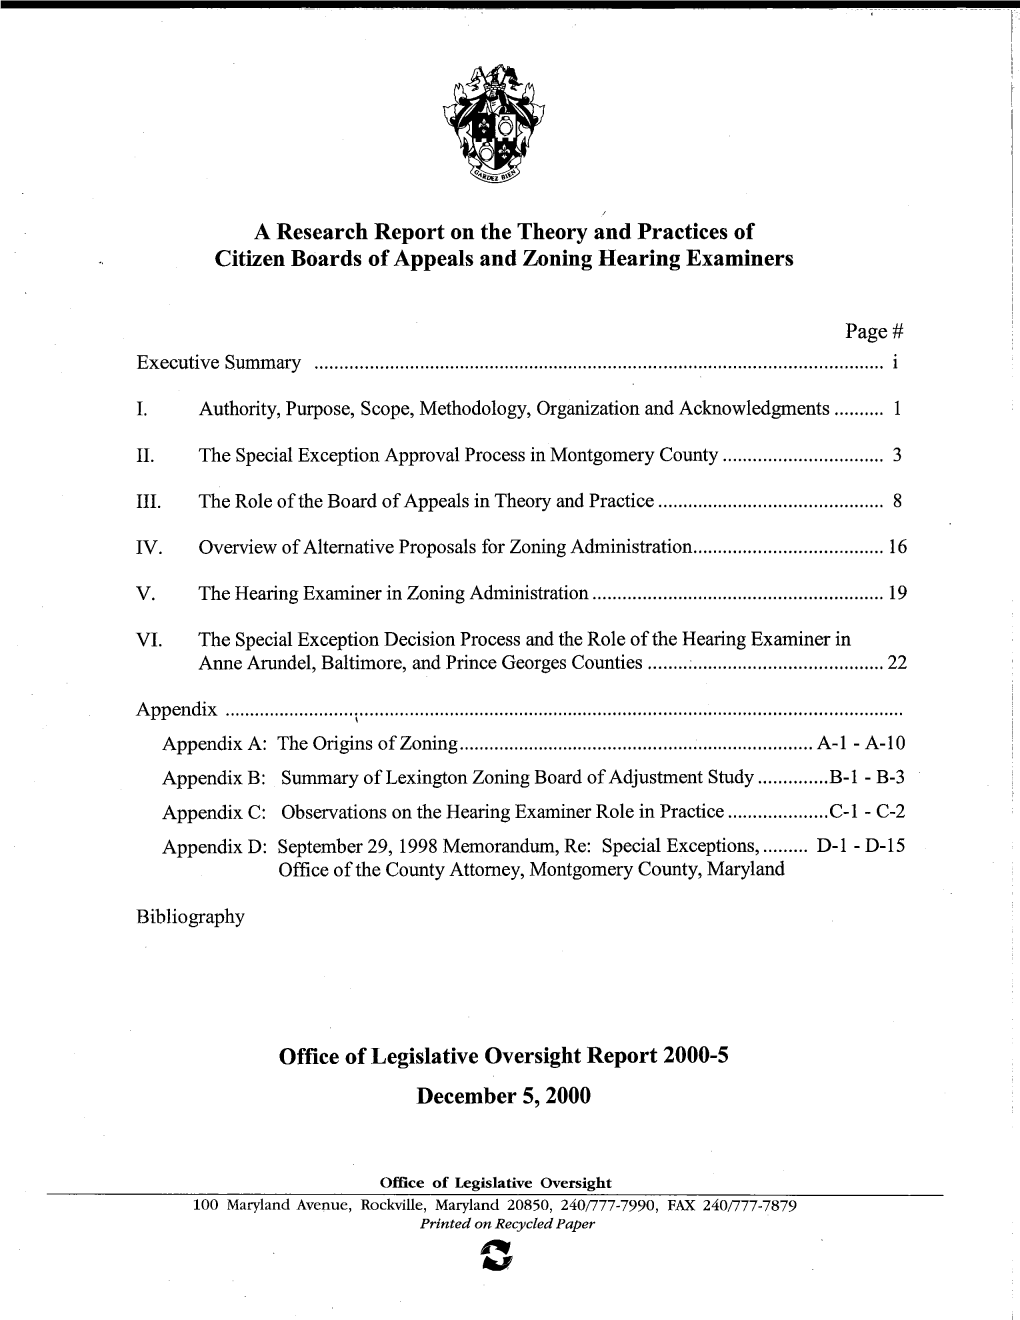 A Research Report on the Theory and Practices of Citizen Boards of Appeals and Zoning Hearing Examiners Office of Legislative Ov